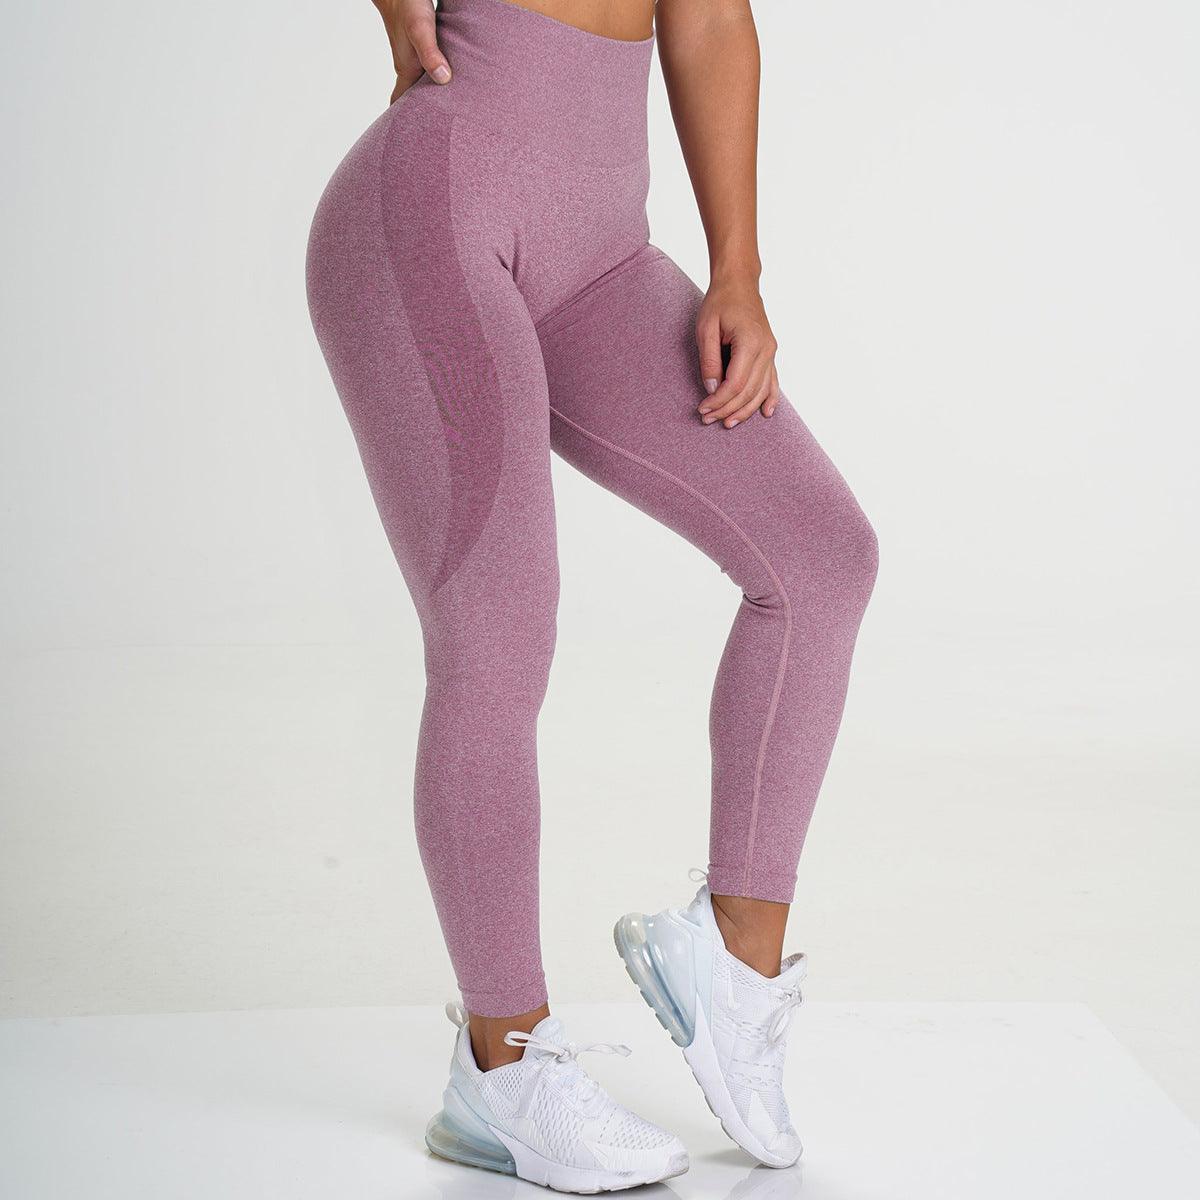 Seamless Breathable Quick-Drying Yoga Pants - High Rise Full-Length Solid Leggings - ForVanity Leggings, women's sports & entertainment Activewear Pants